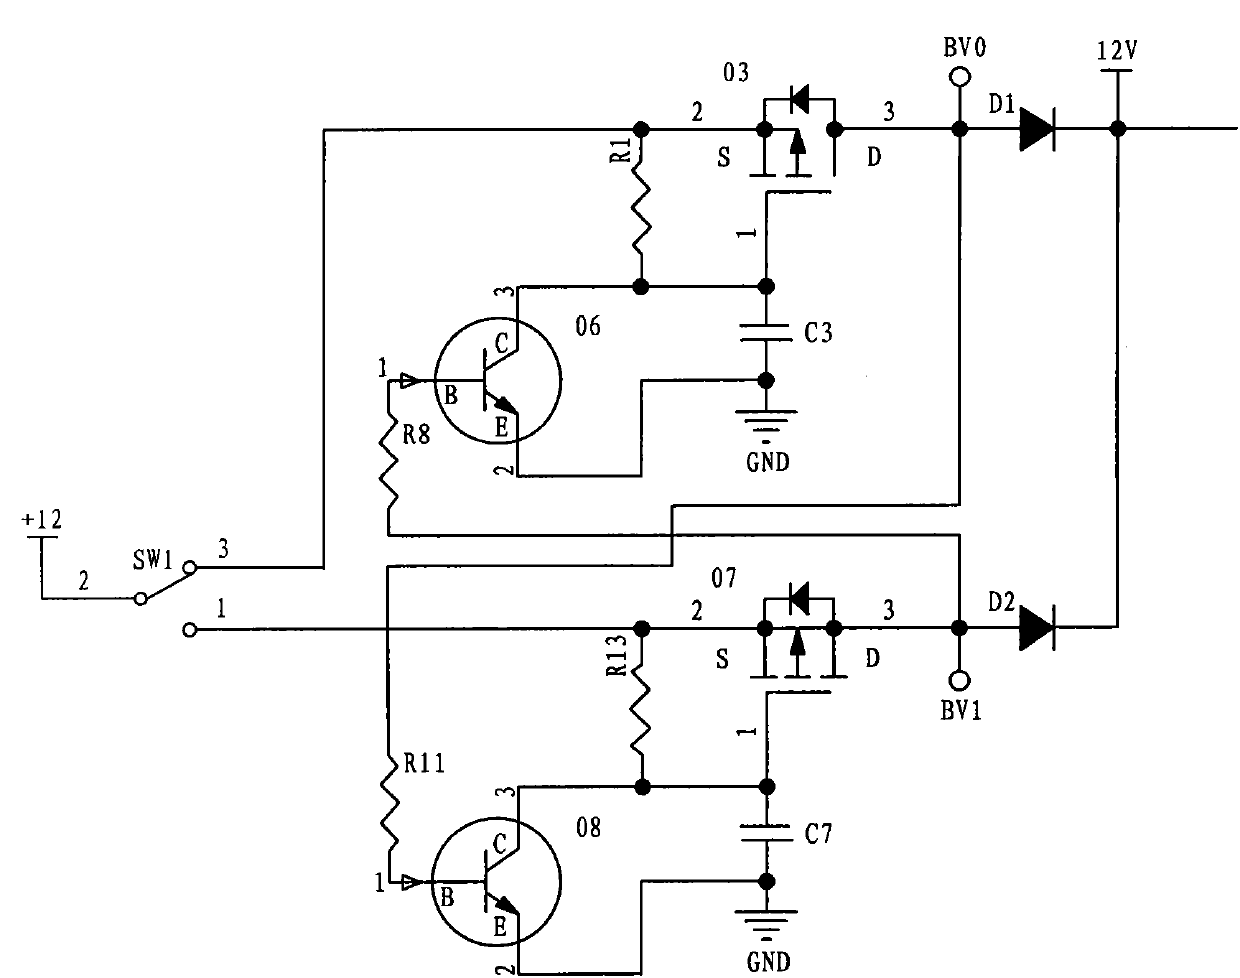 Reed power-on switchover time-delay shutdown circuit